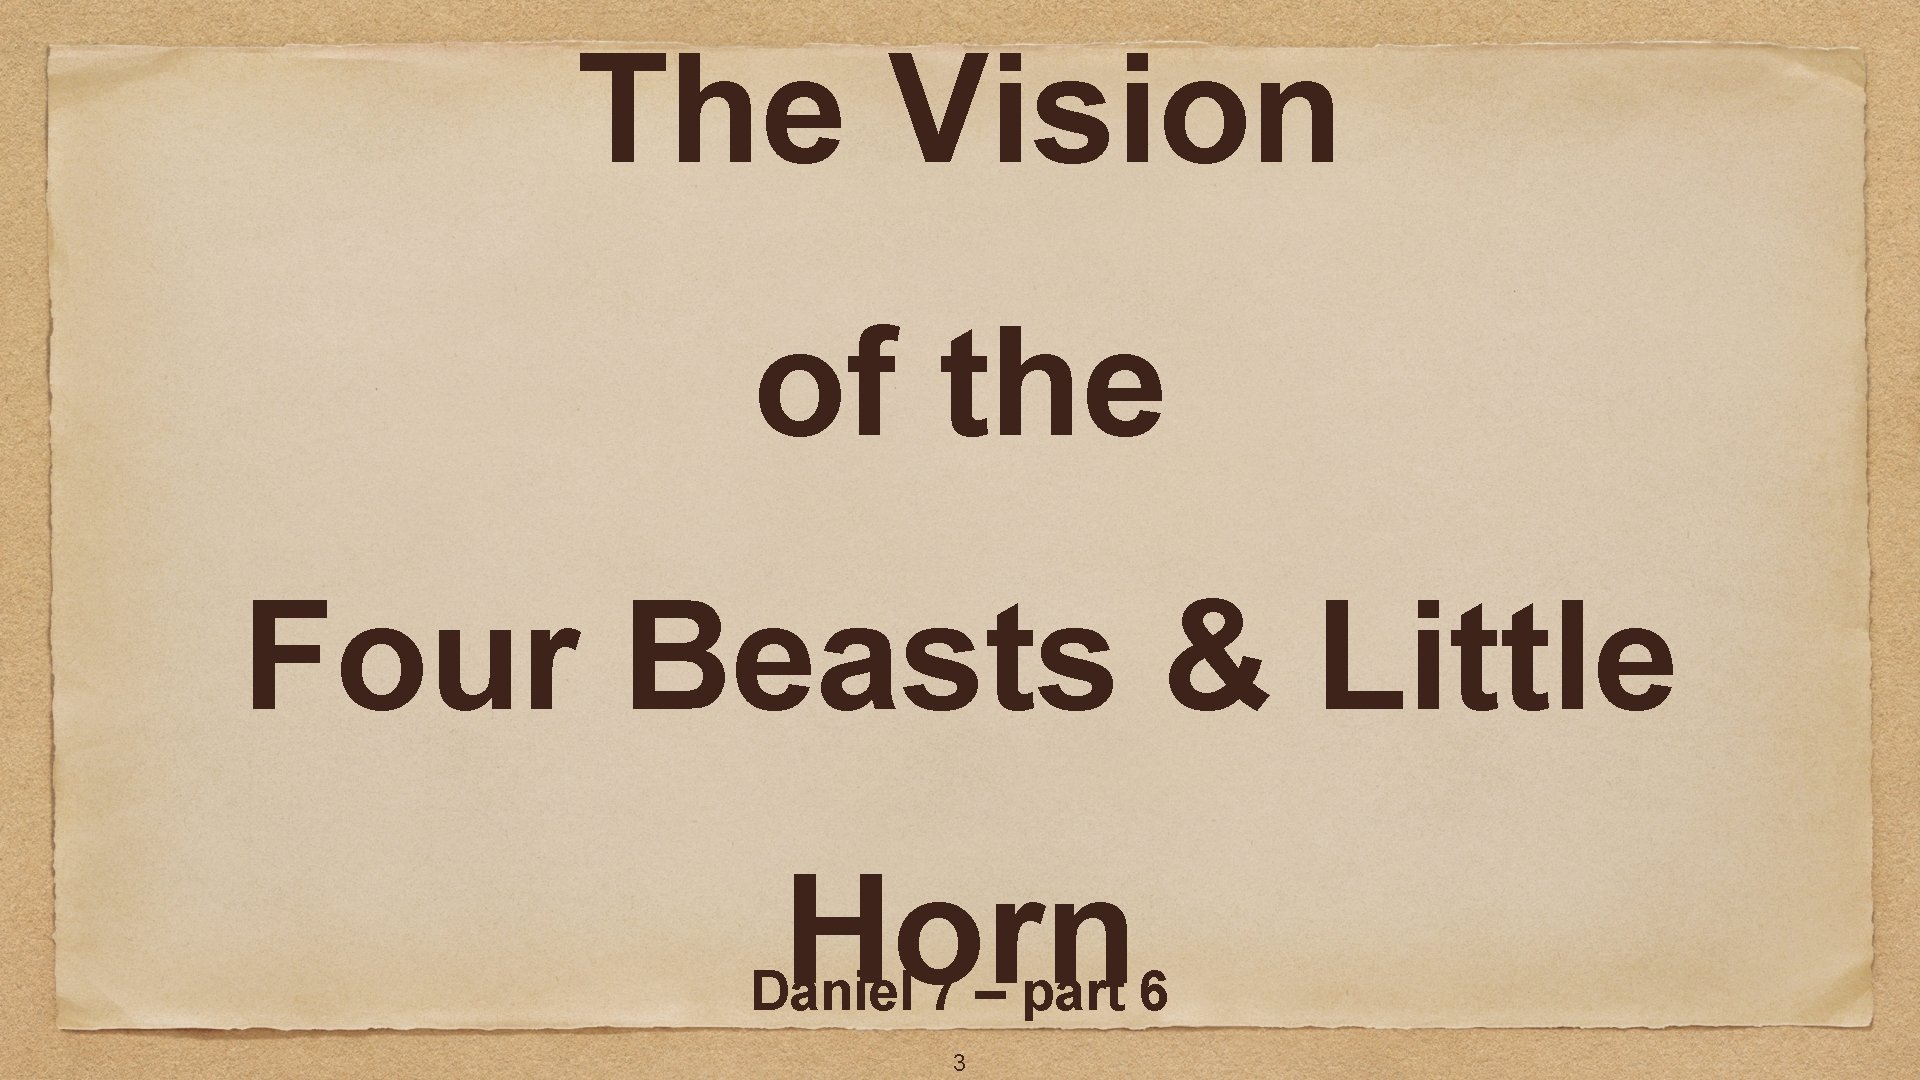 The Vision of the Four Beasts & Little Horn Daniel 7 – part 6